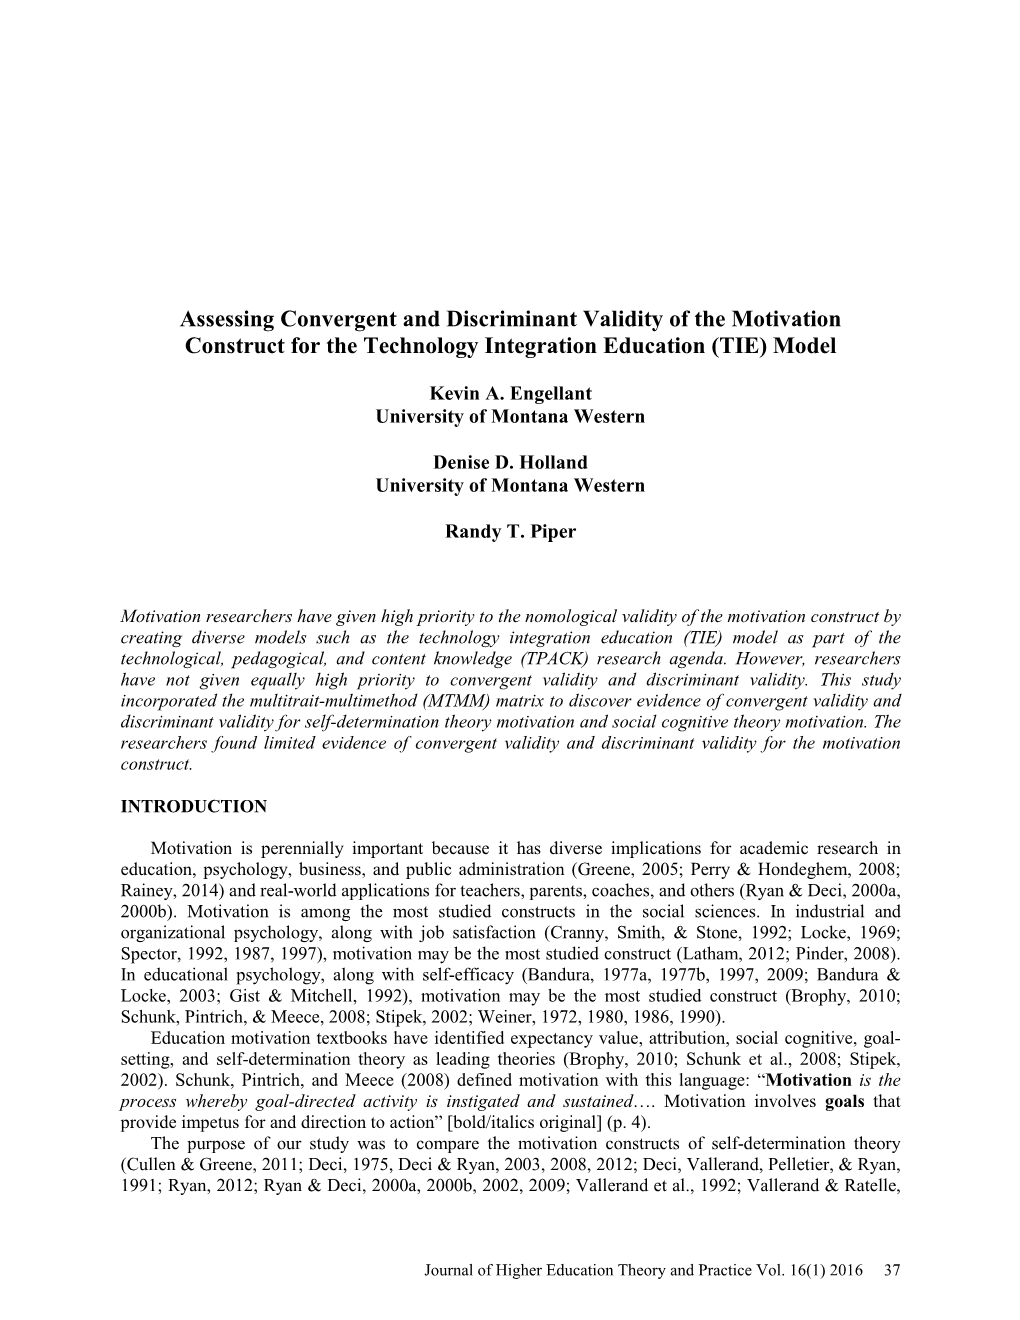 Assessing Convergent and Discriminant Validity of the Motivation Construct for the Technology Integration Education (TIE) Model